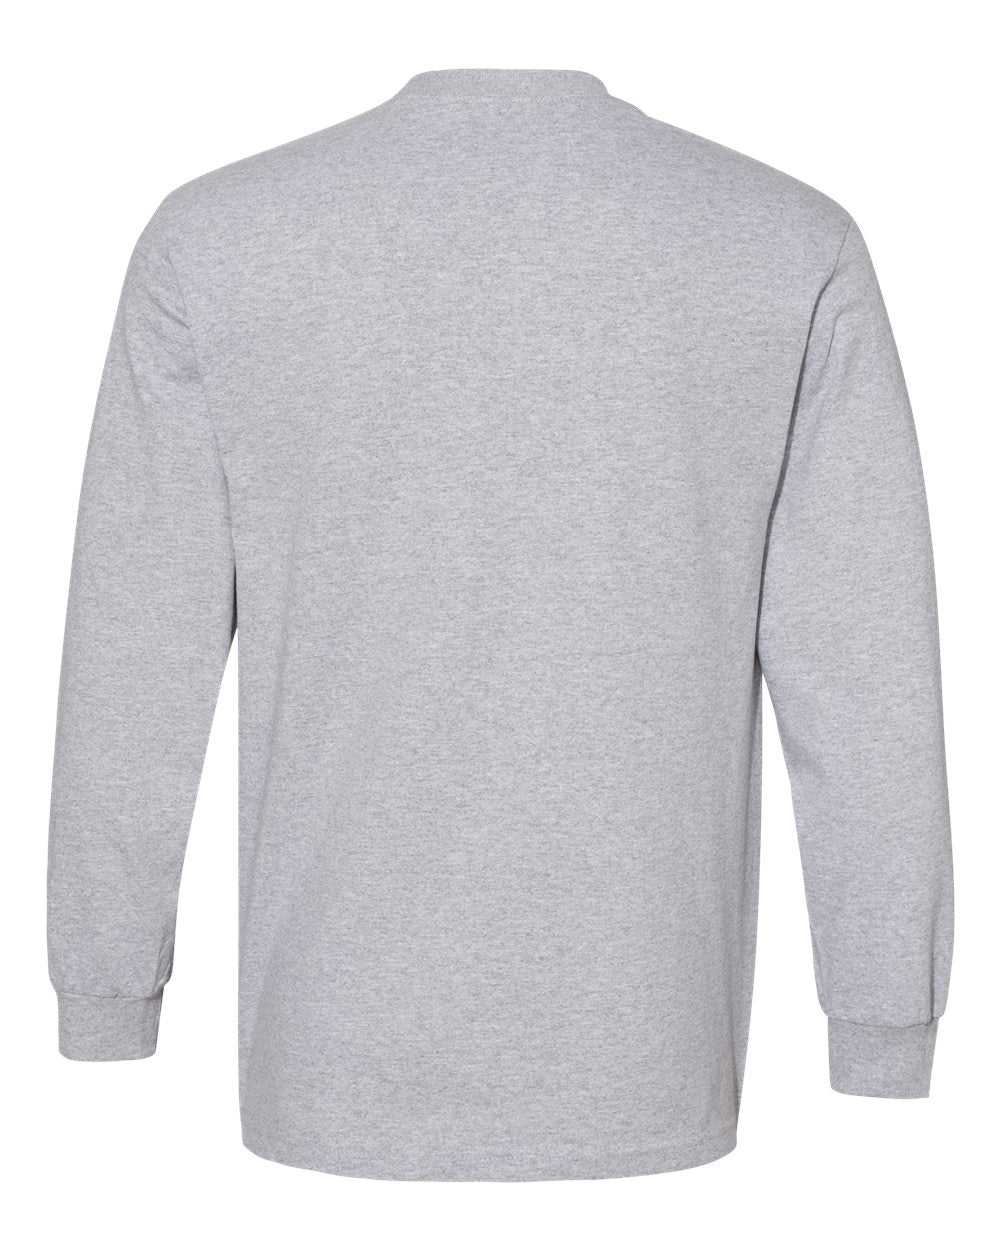 American Apparel 1304 Unisex Heavyweight Cotton Long Sleeve T-Shirt - Athletic Heather - HIT a Double